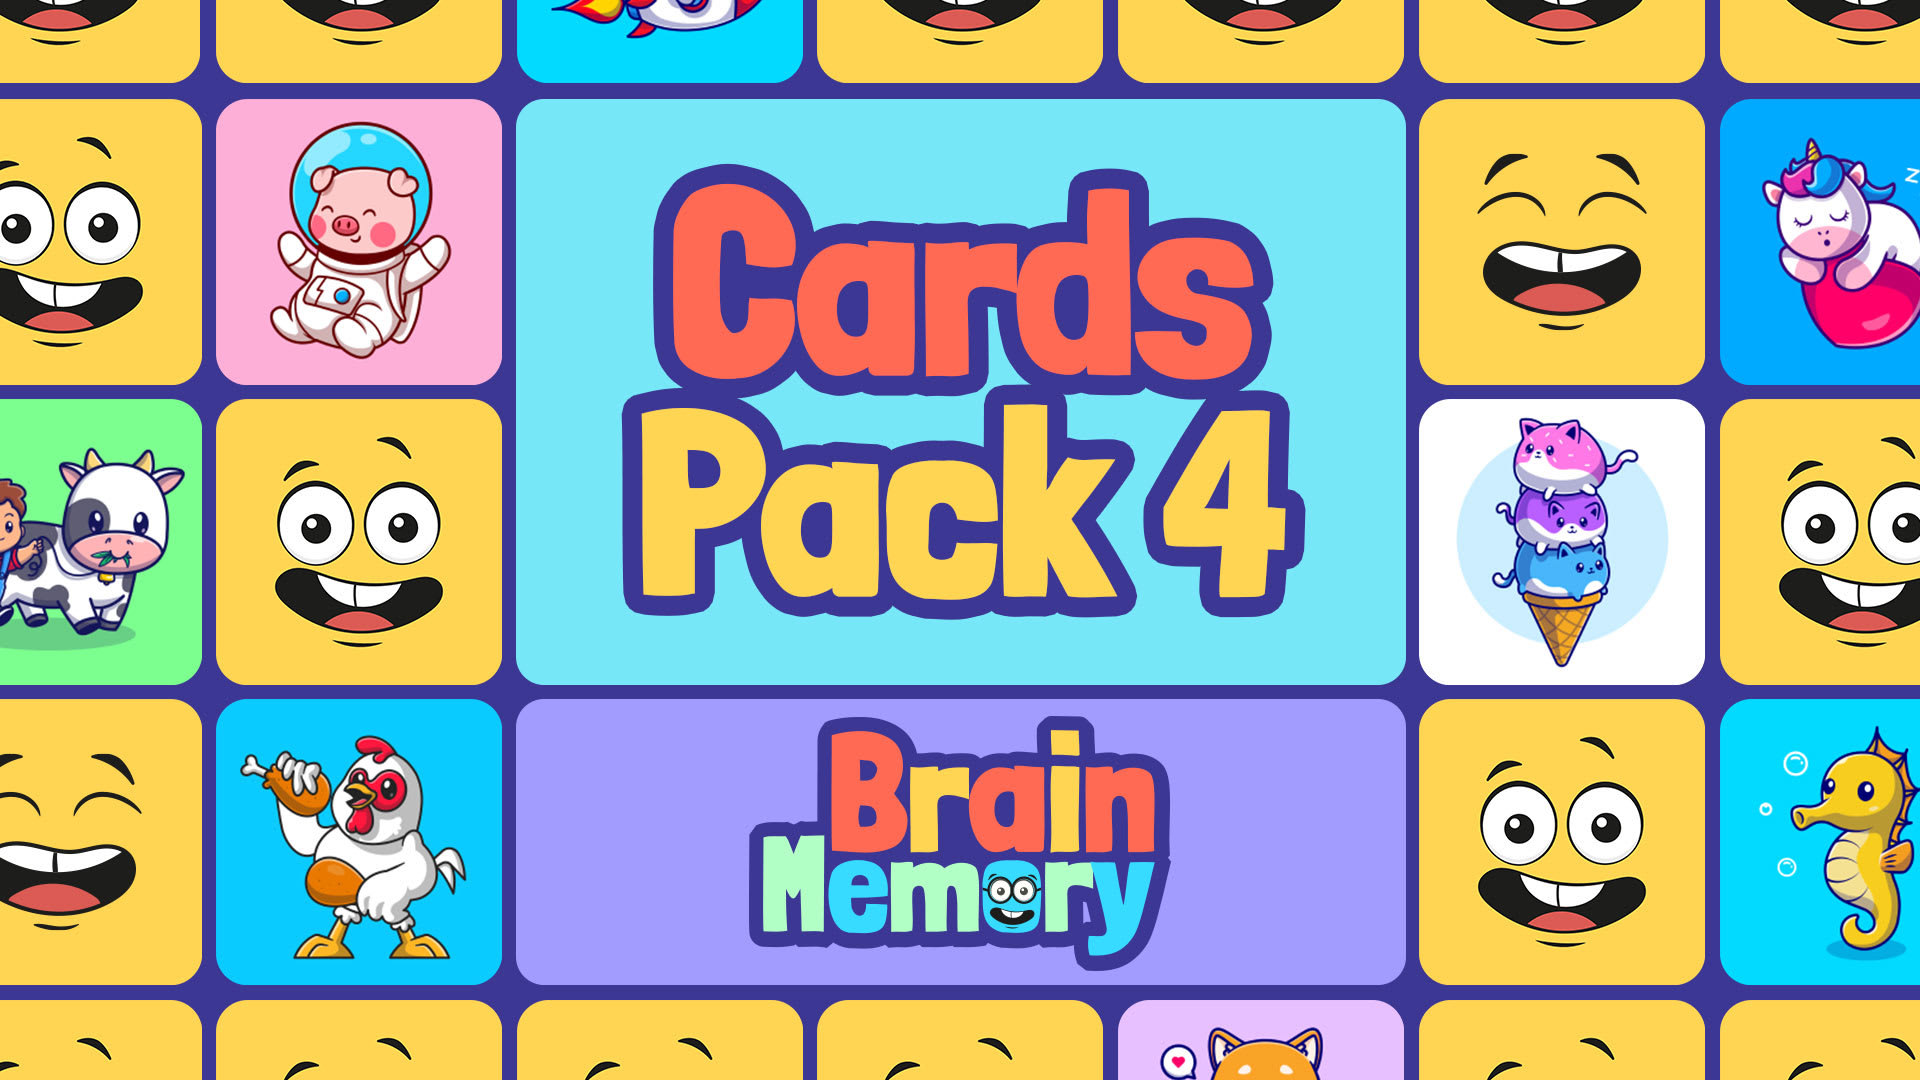 Cards Pack 4 1